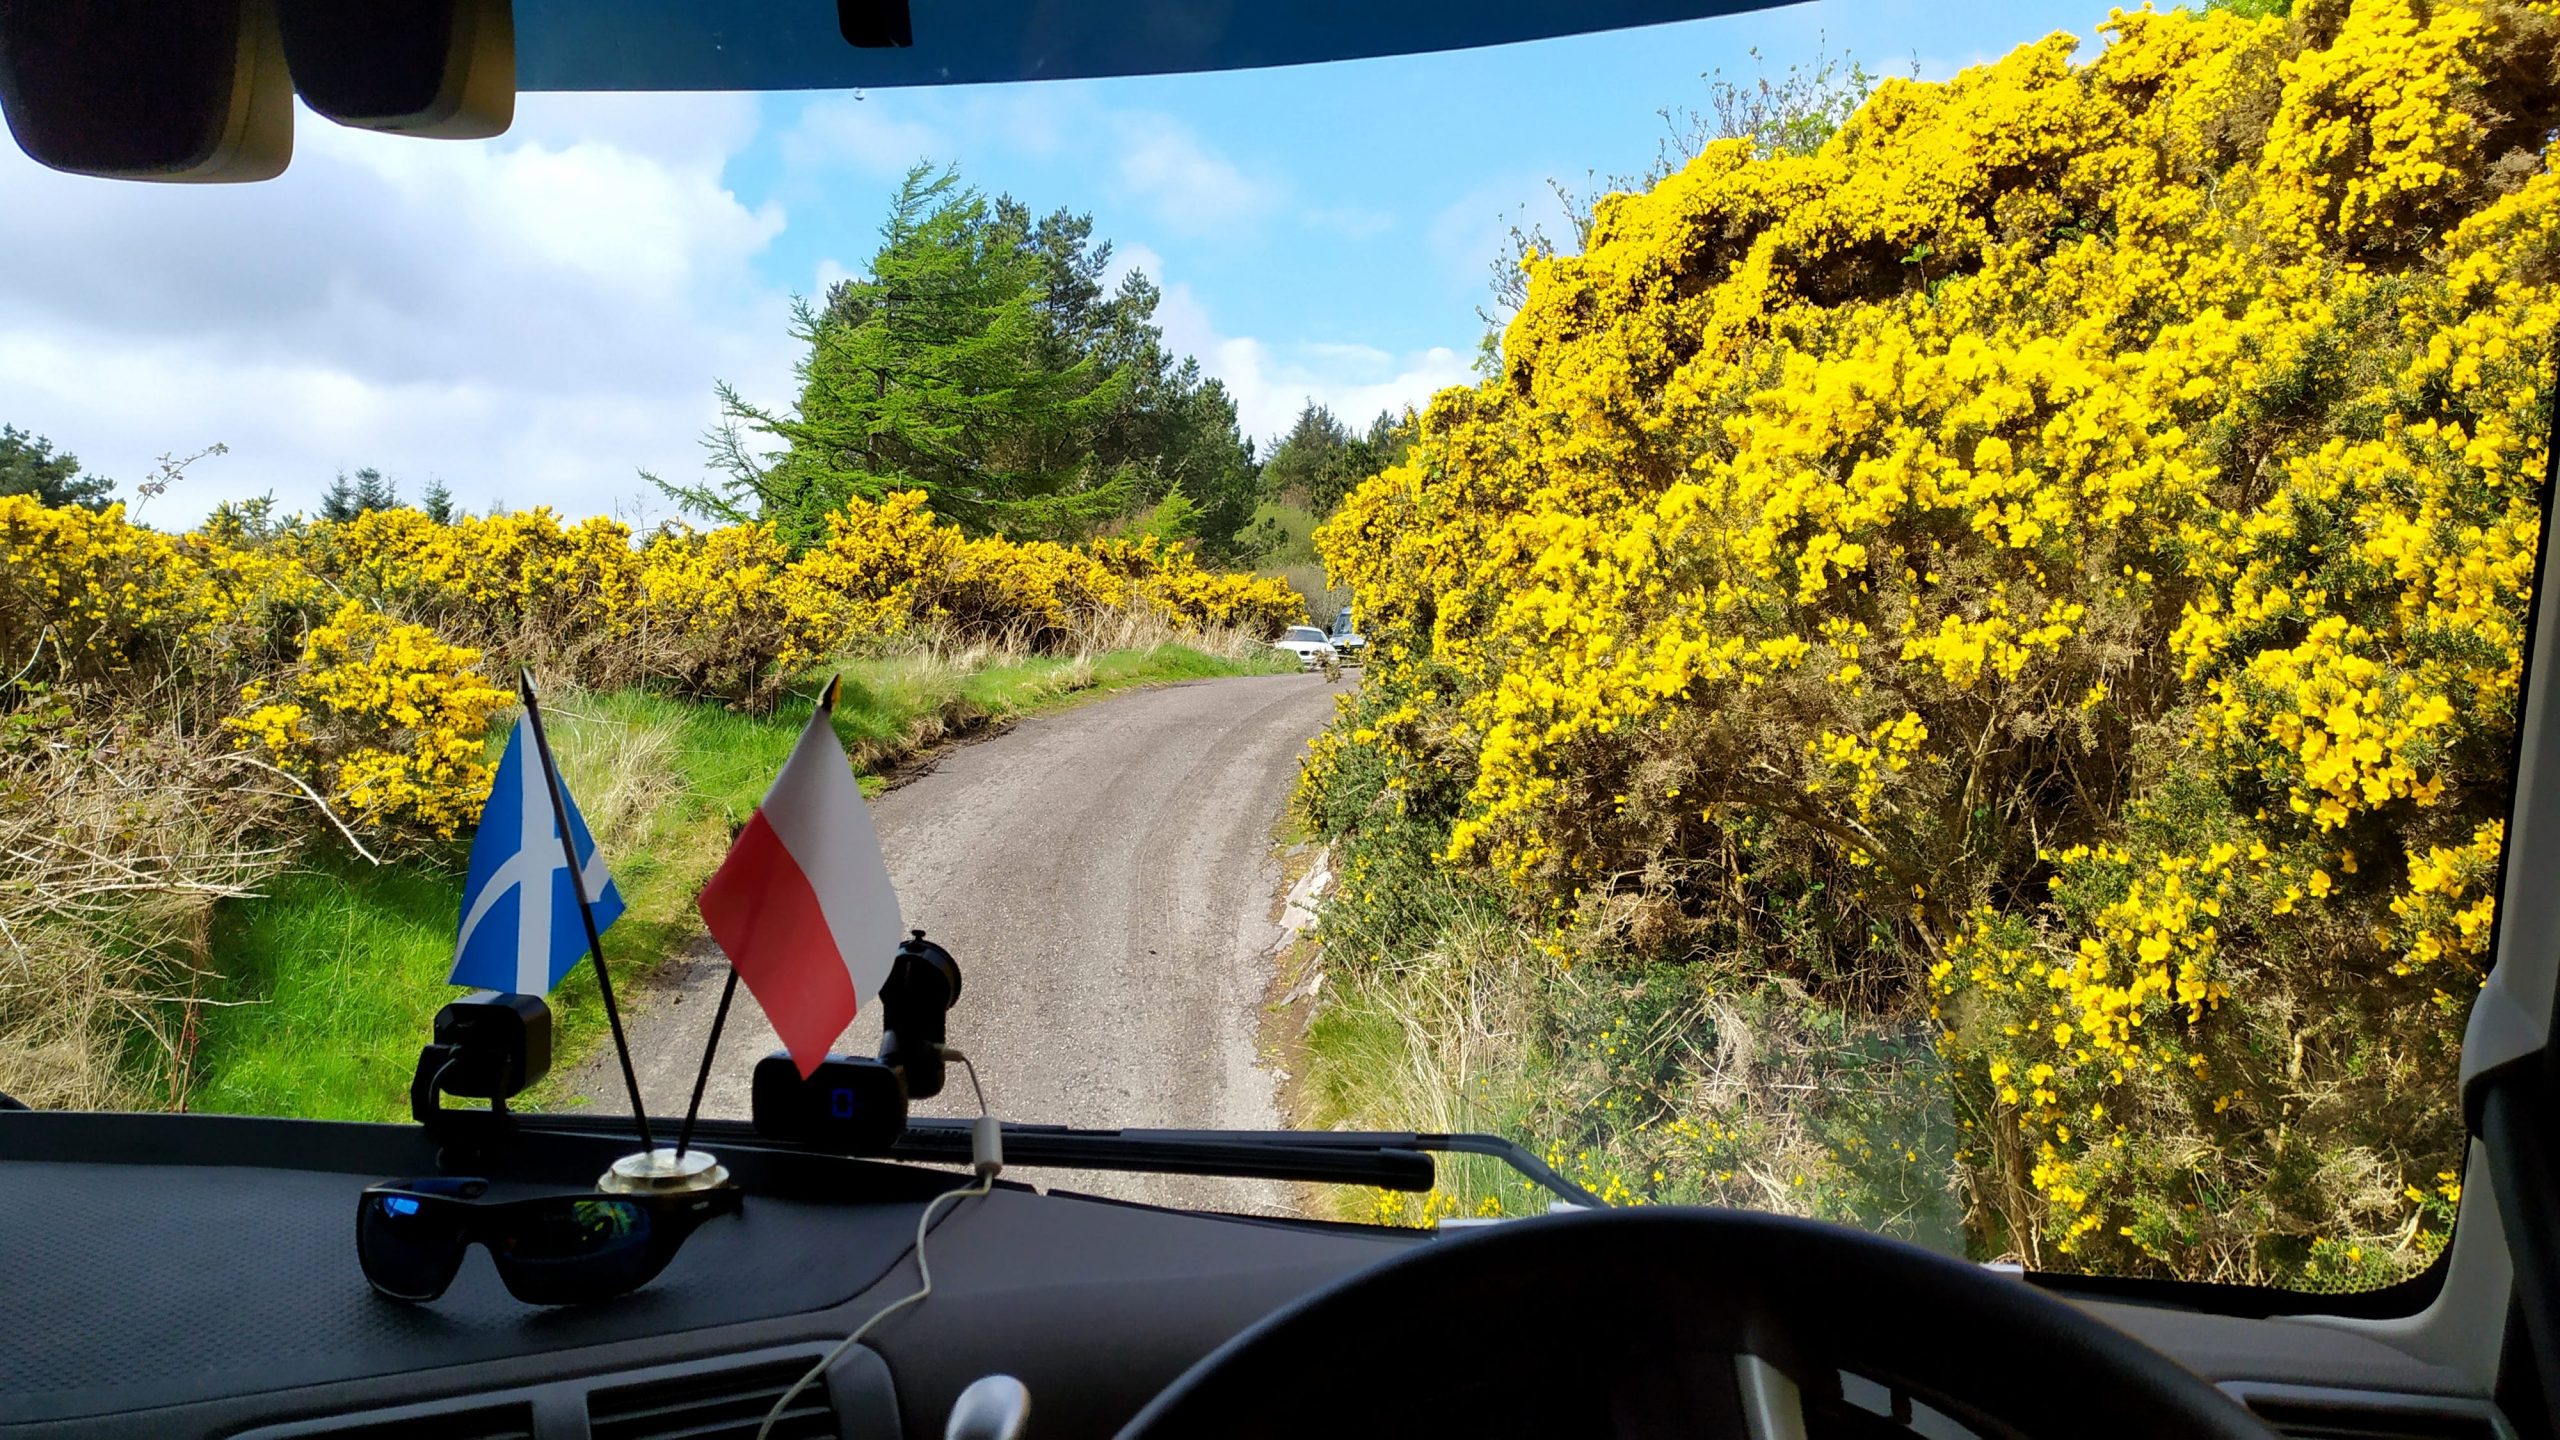 View from the driver's seat in the truck of narrow roads with cars approaching.